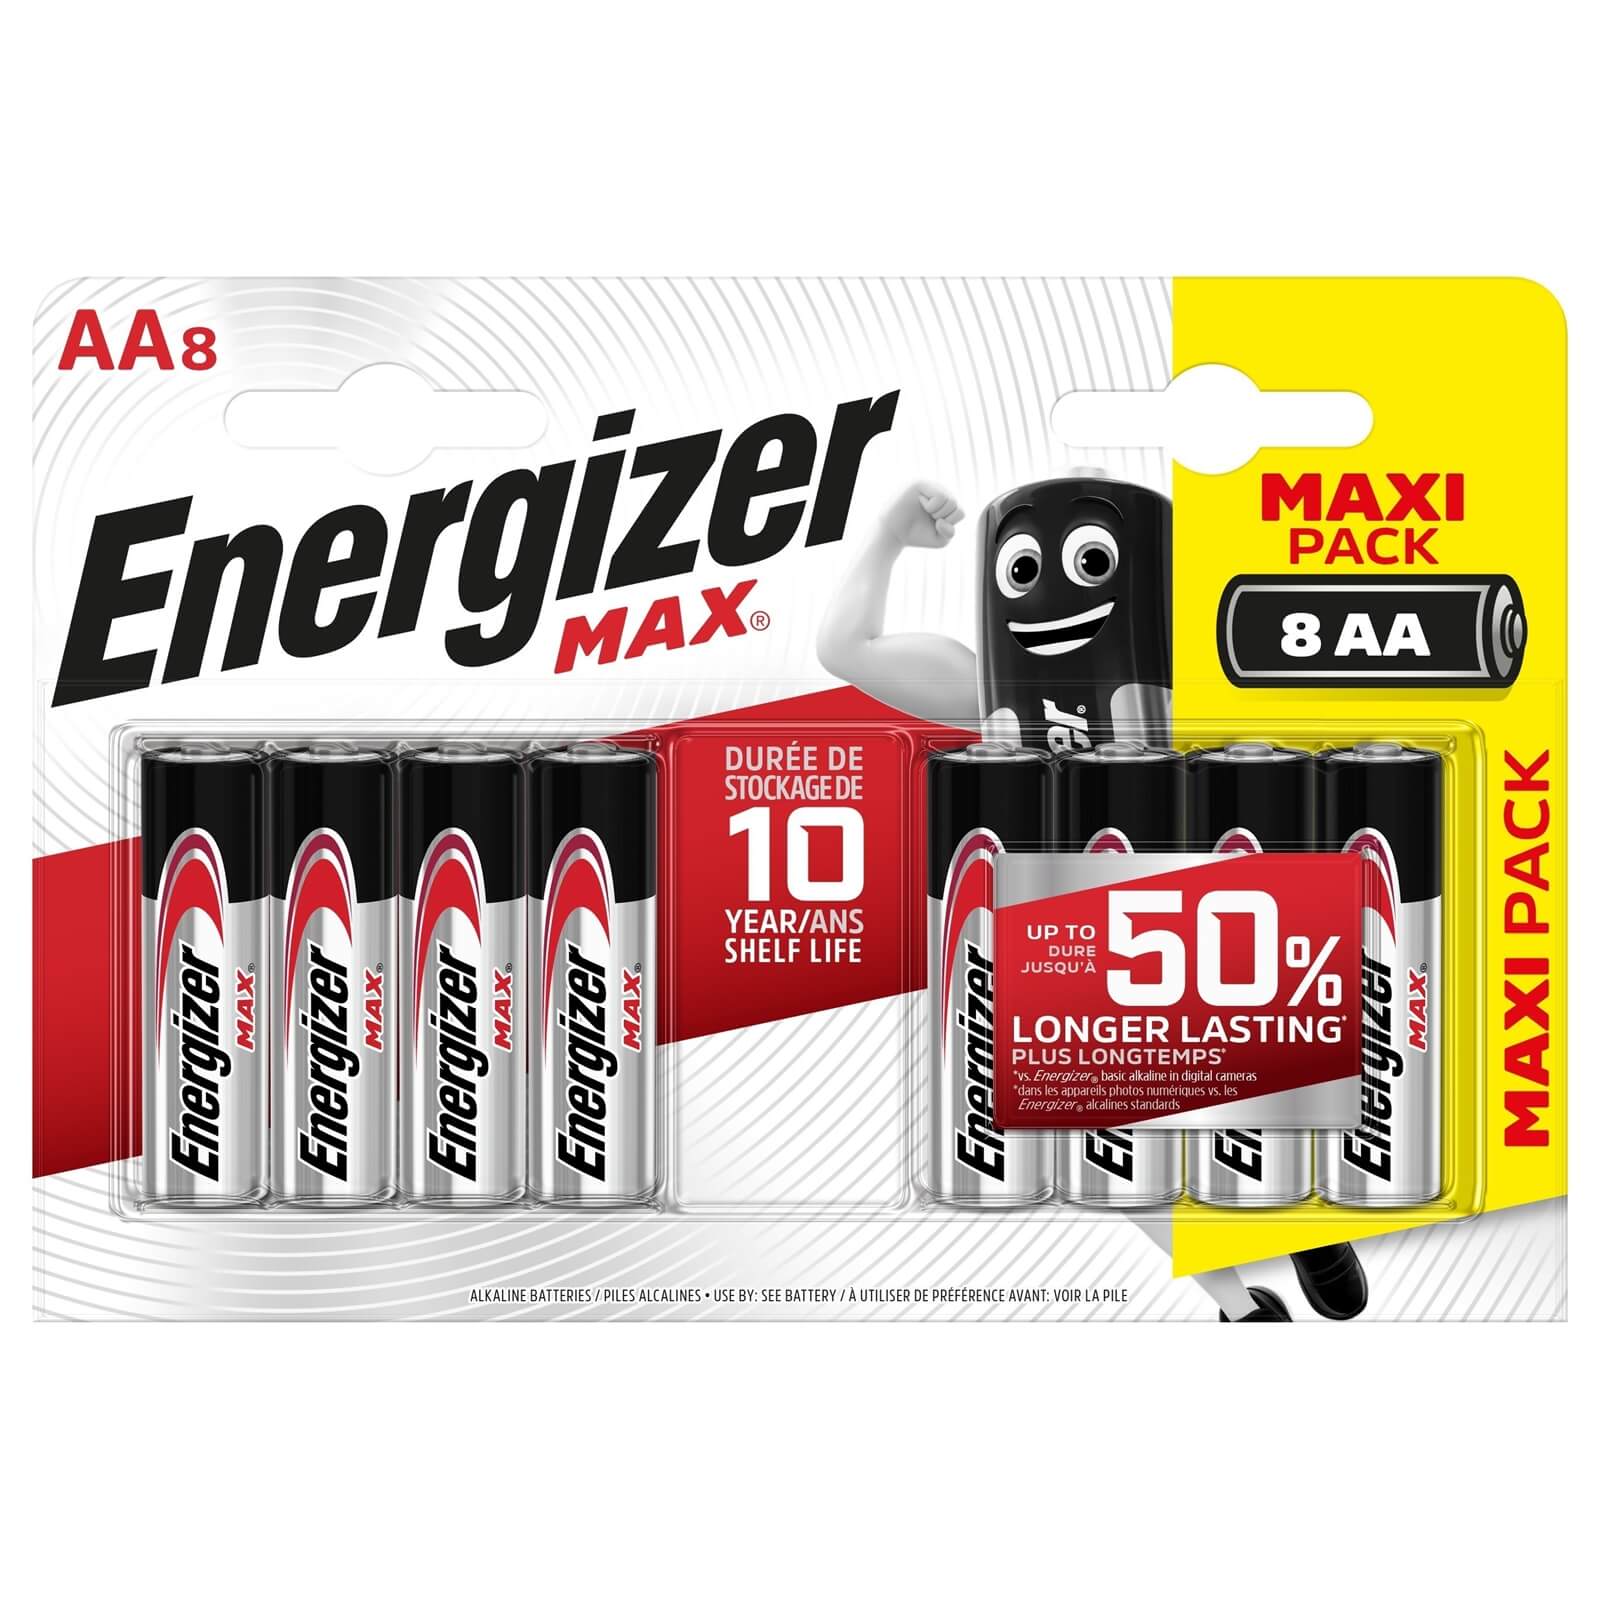 Photo of Energizer Max Alkaline Aa Batteries - 8 Pack